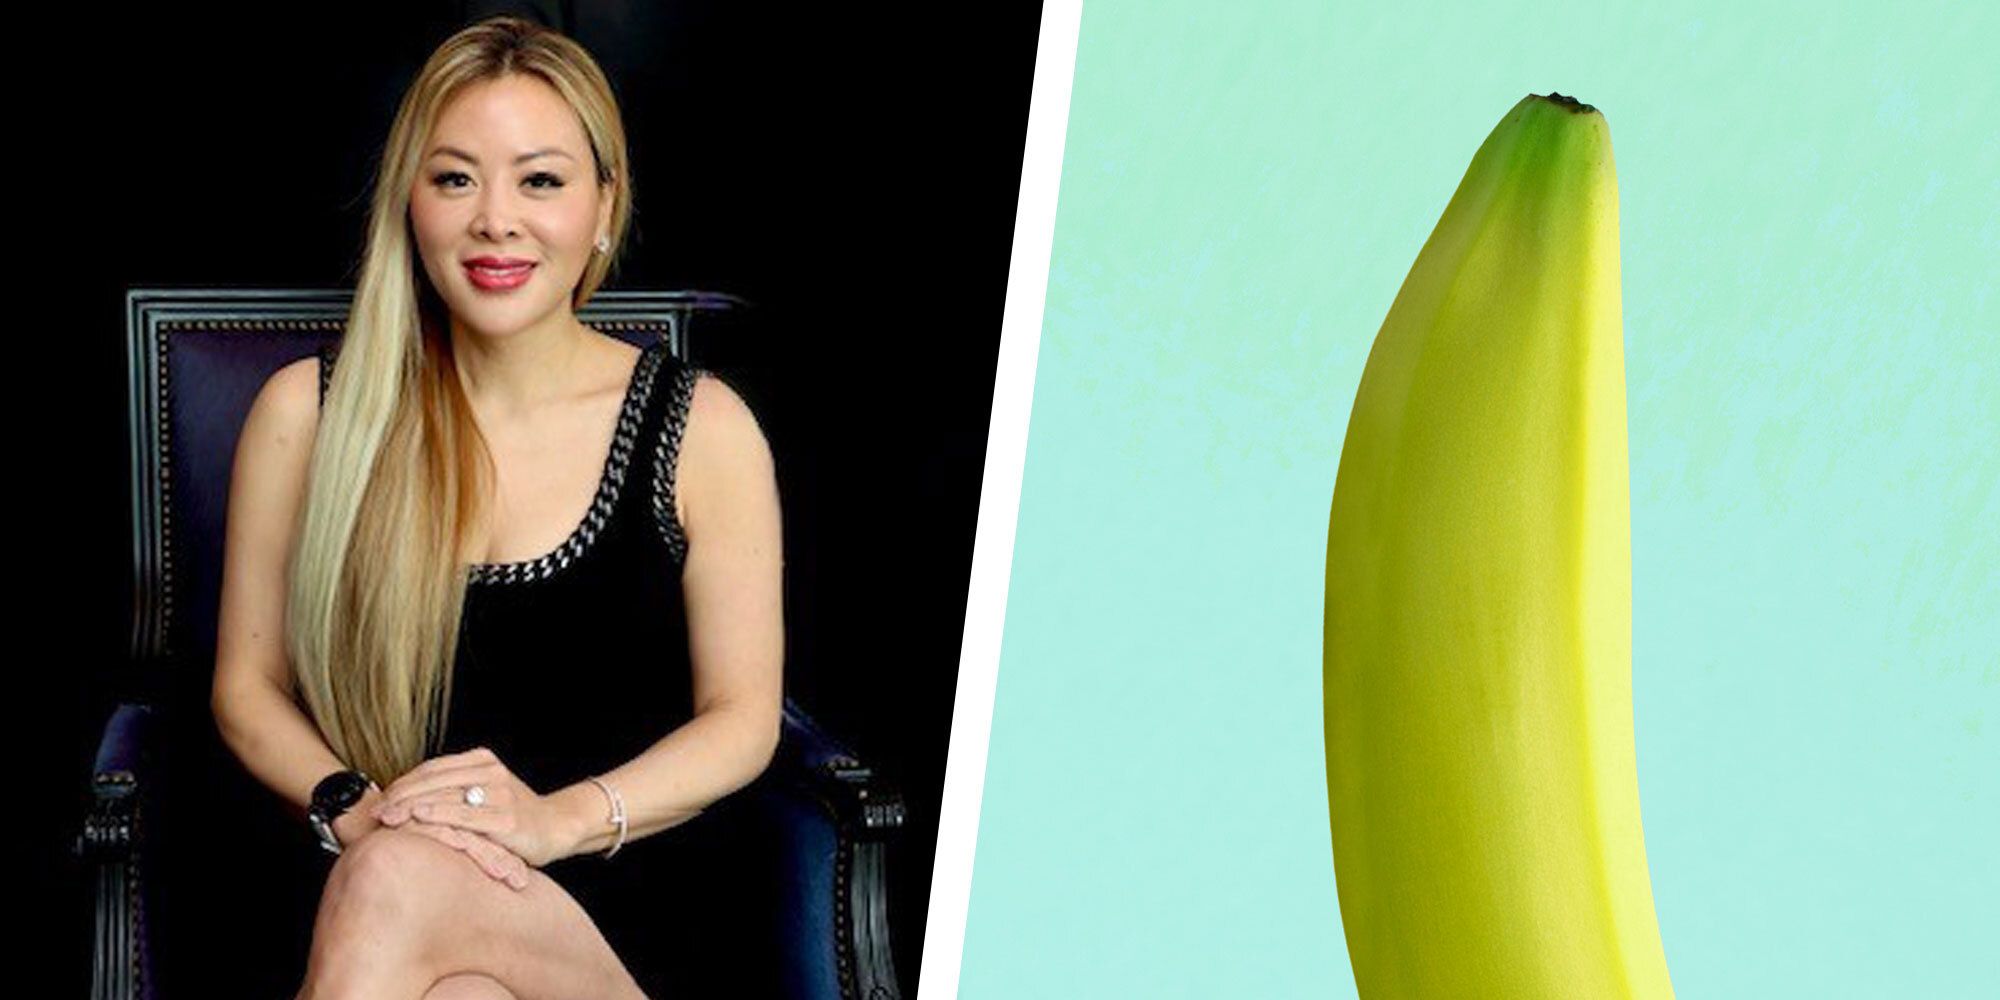 Zeebrasem Gymnast syndroom Dermatologist Jessie Cheung on How to Make Your Penis Bigger